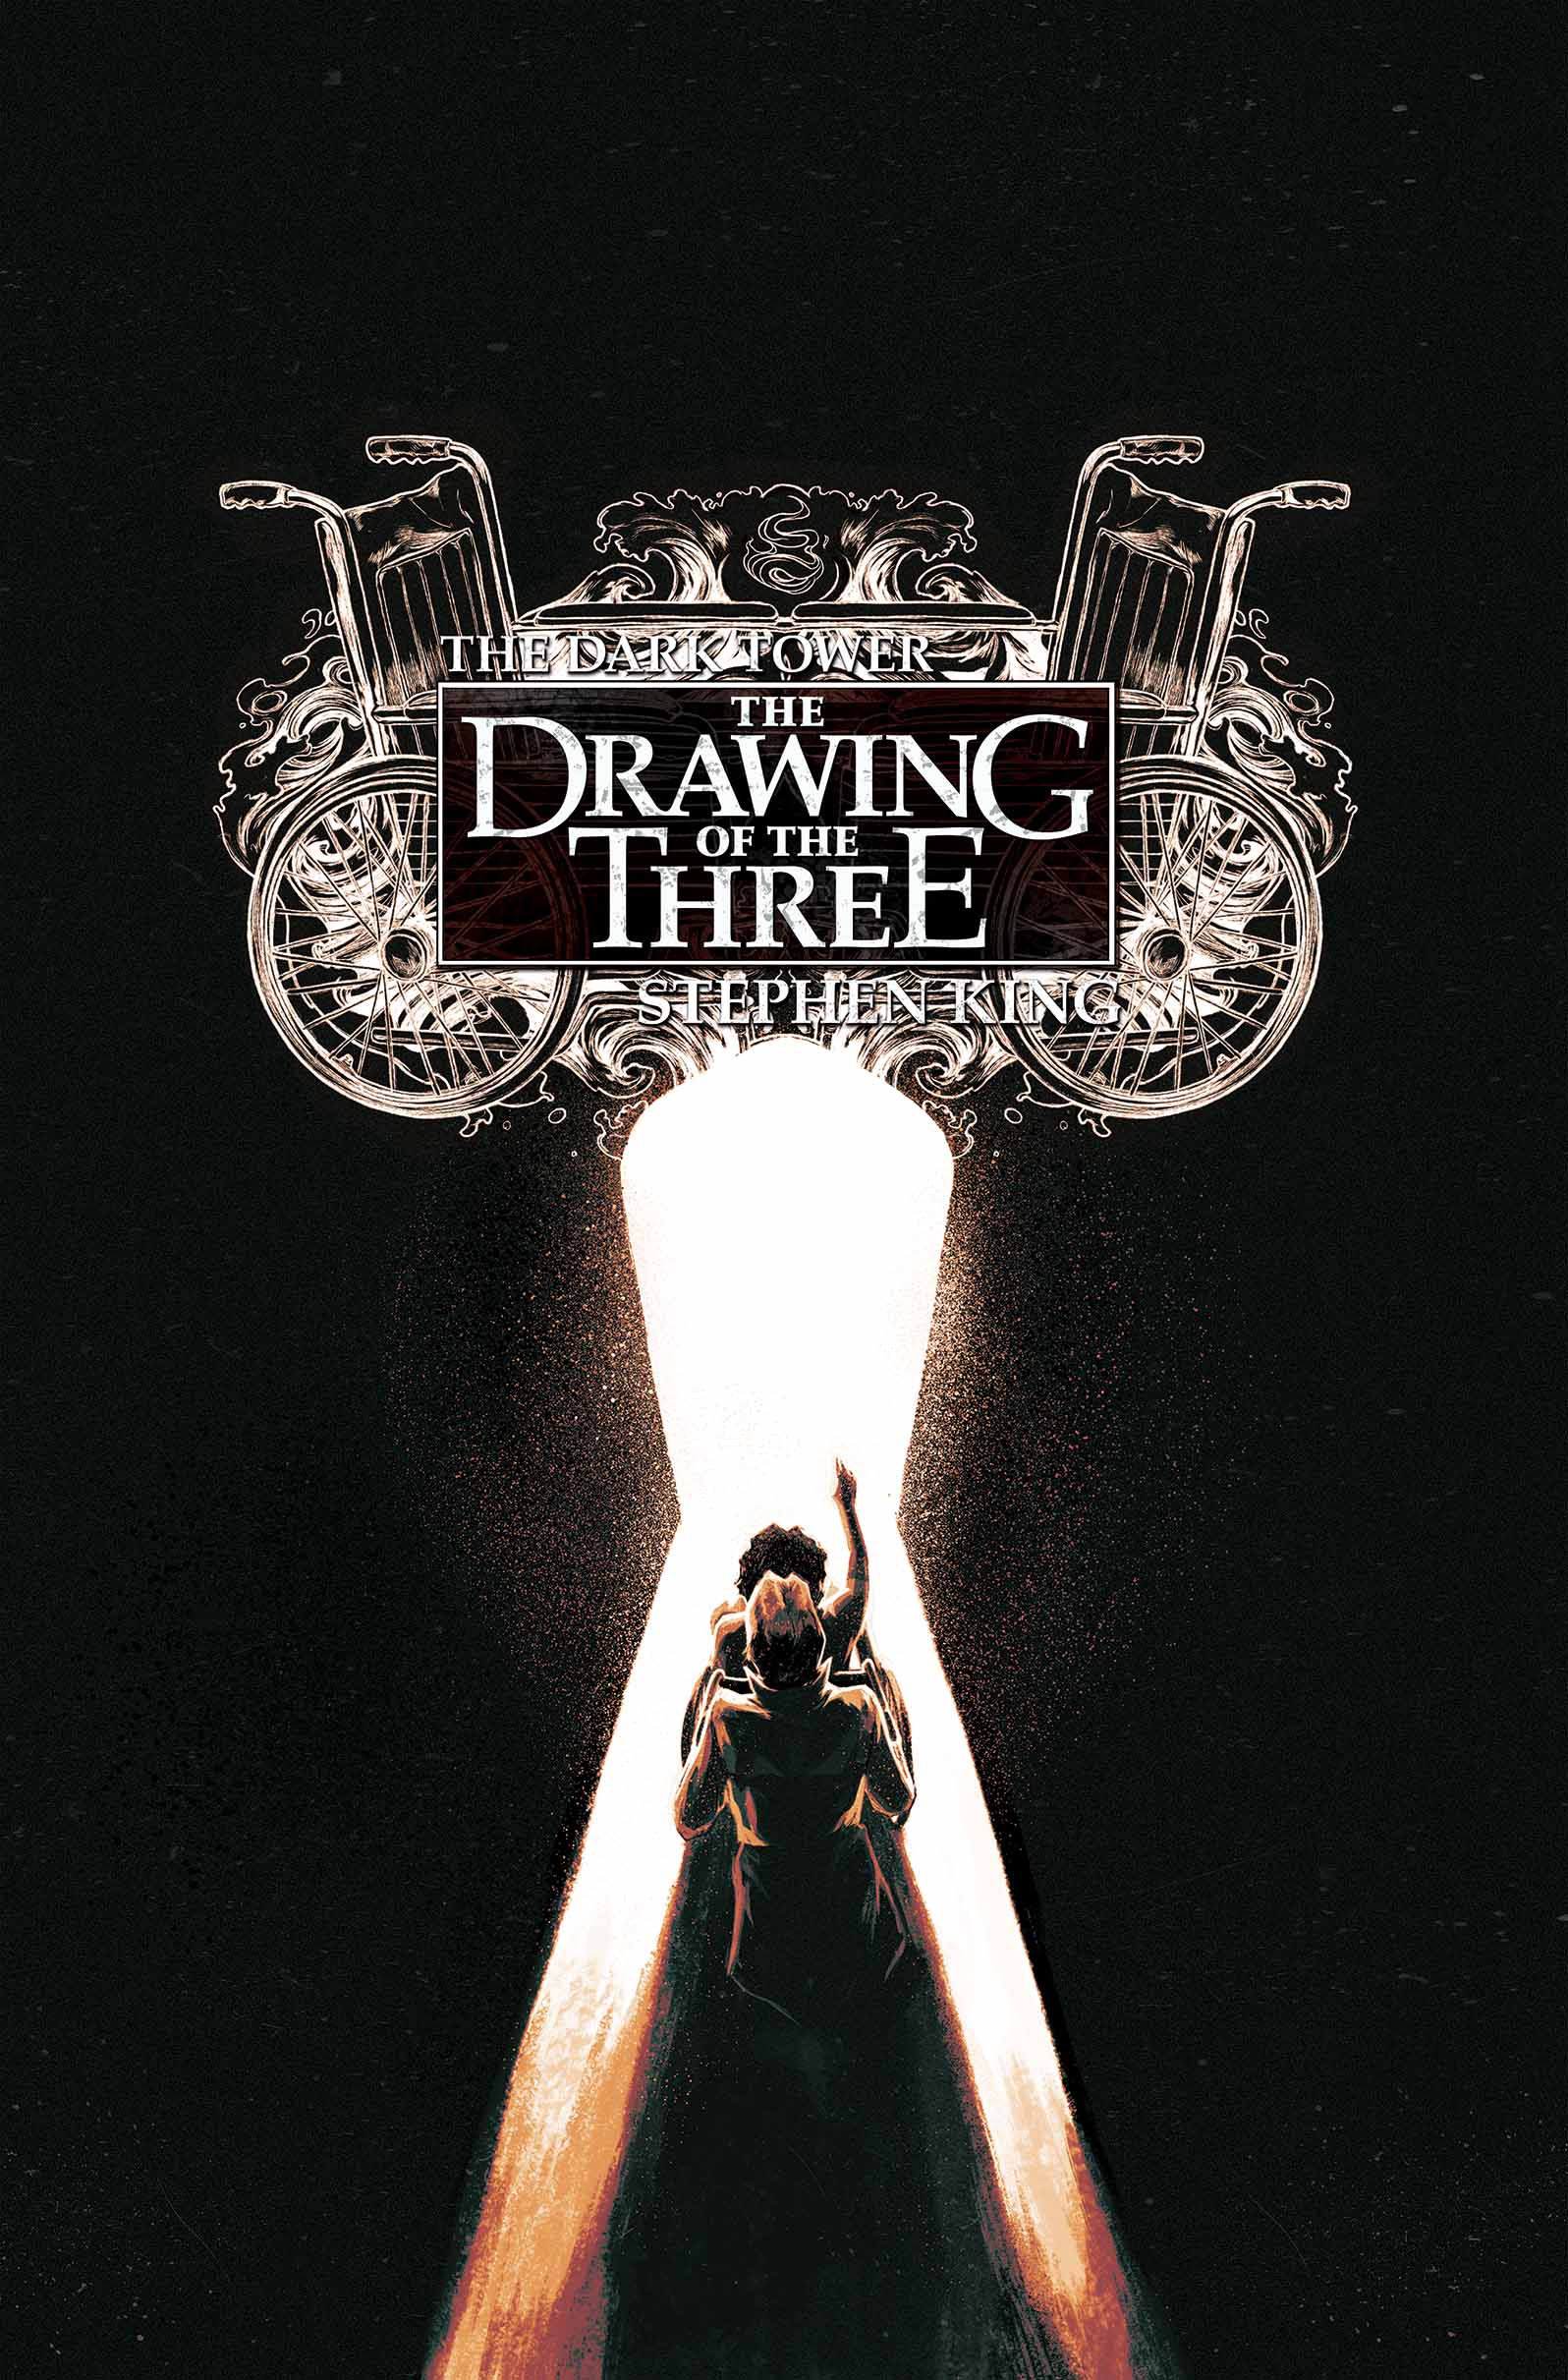 The Dark Tower: The Drawing of the Three - Lady of Shadows #5